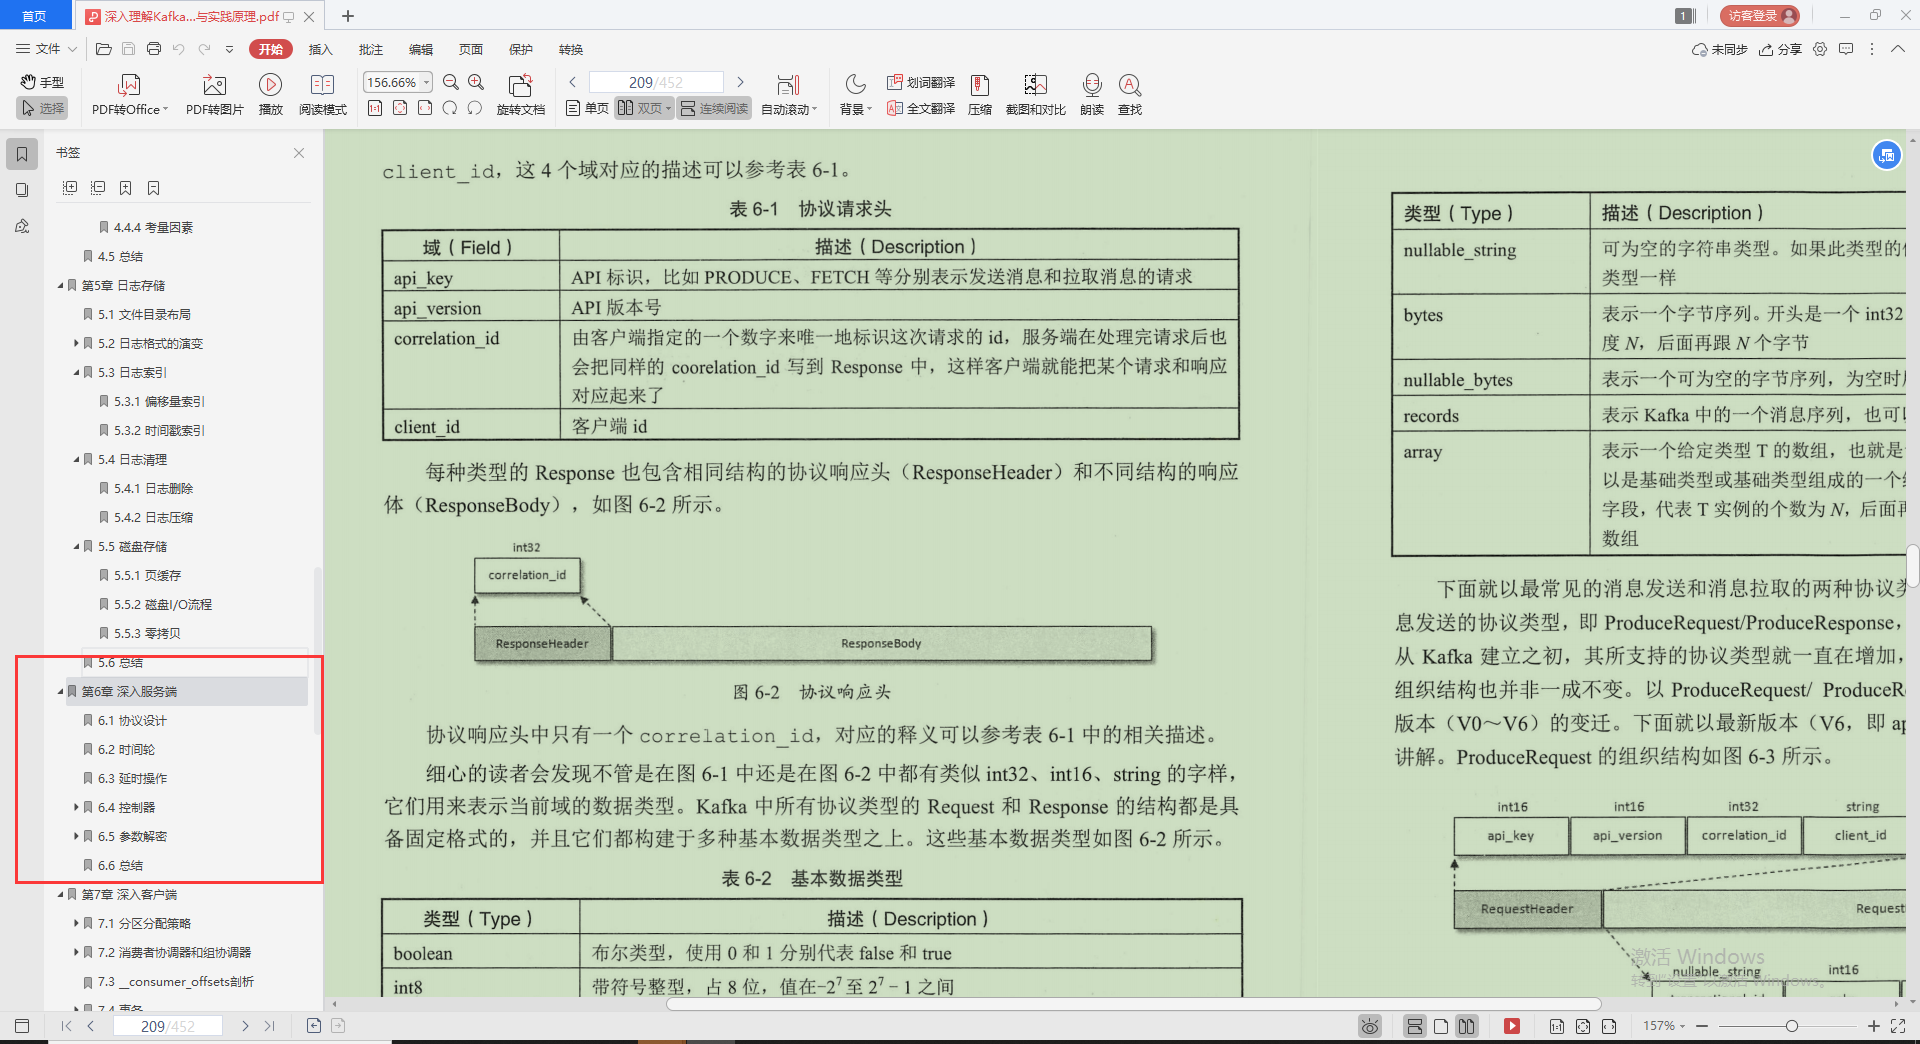 As expected to be the technical officer of Alibaba, the essence of Kafka is written in this "Limited Notes", served